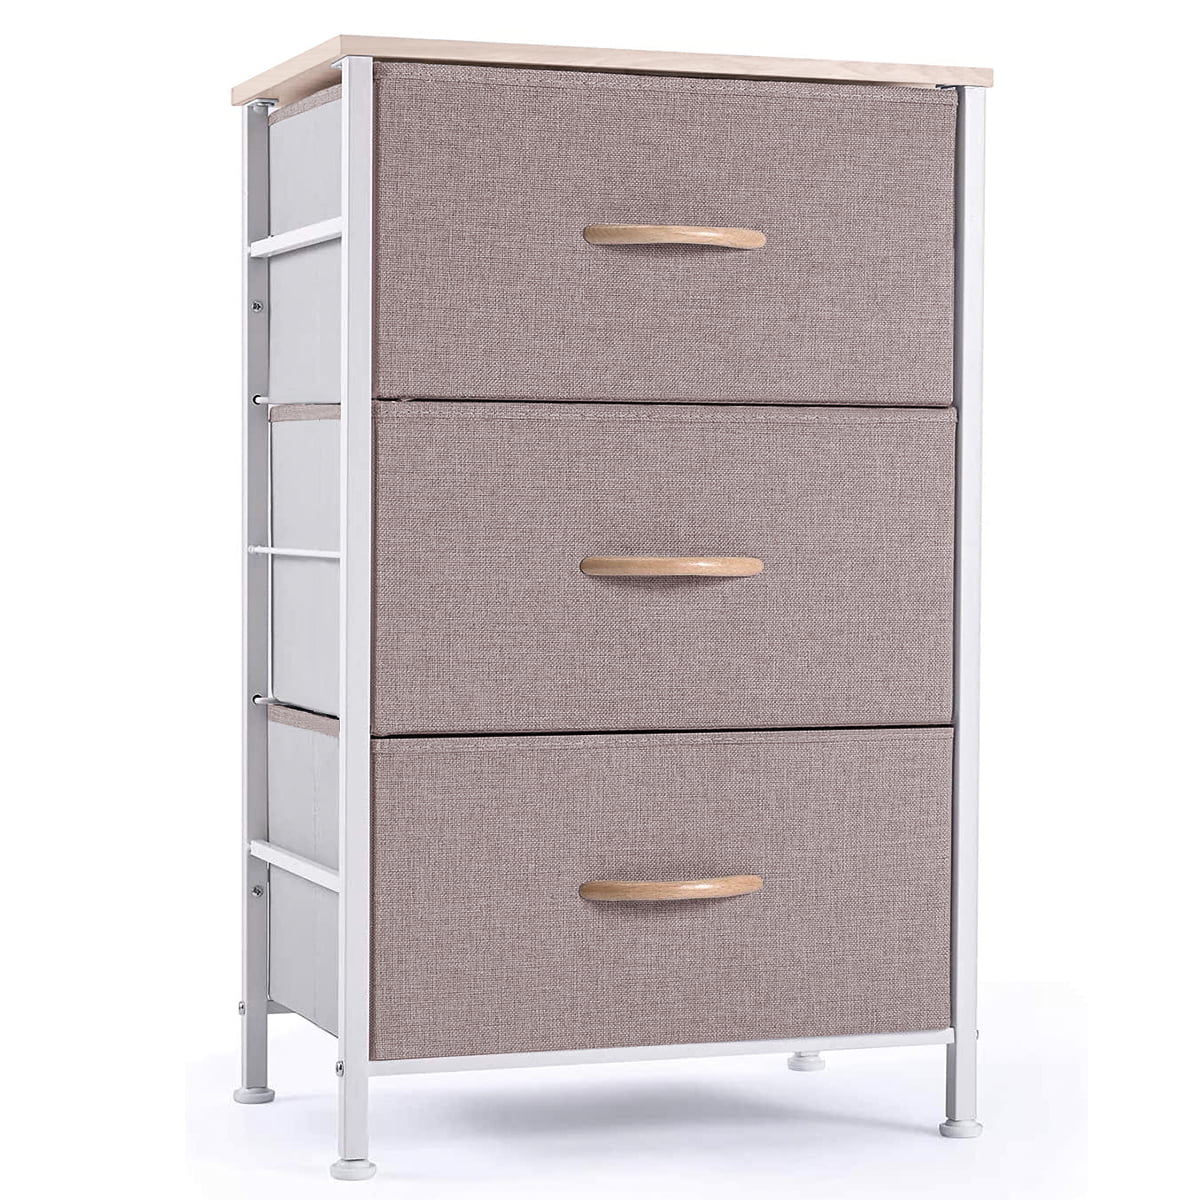 Dressers for Bedroom Television Dressers 3-7 Drawer Dressers Fabric ...